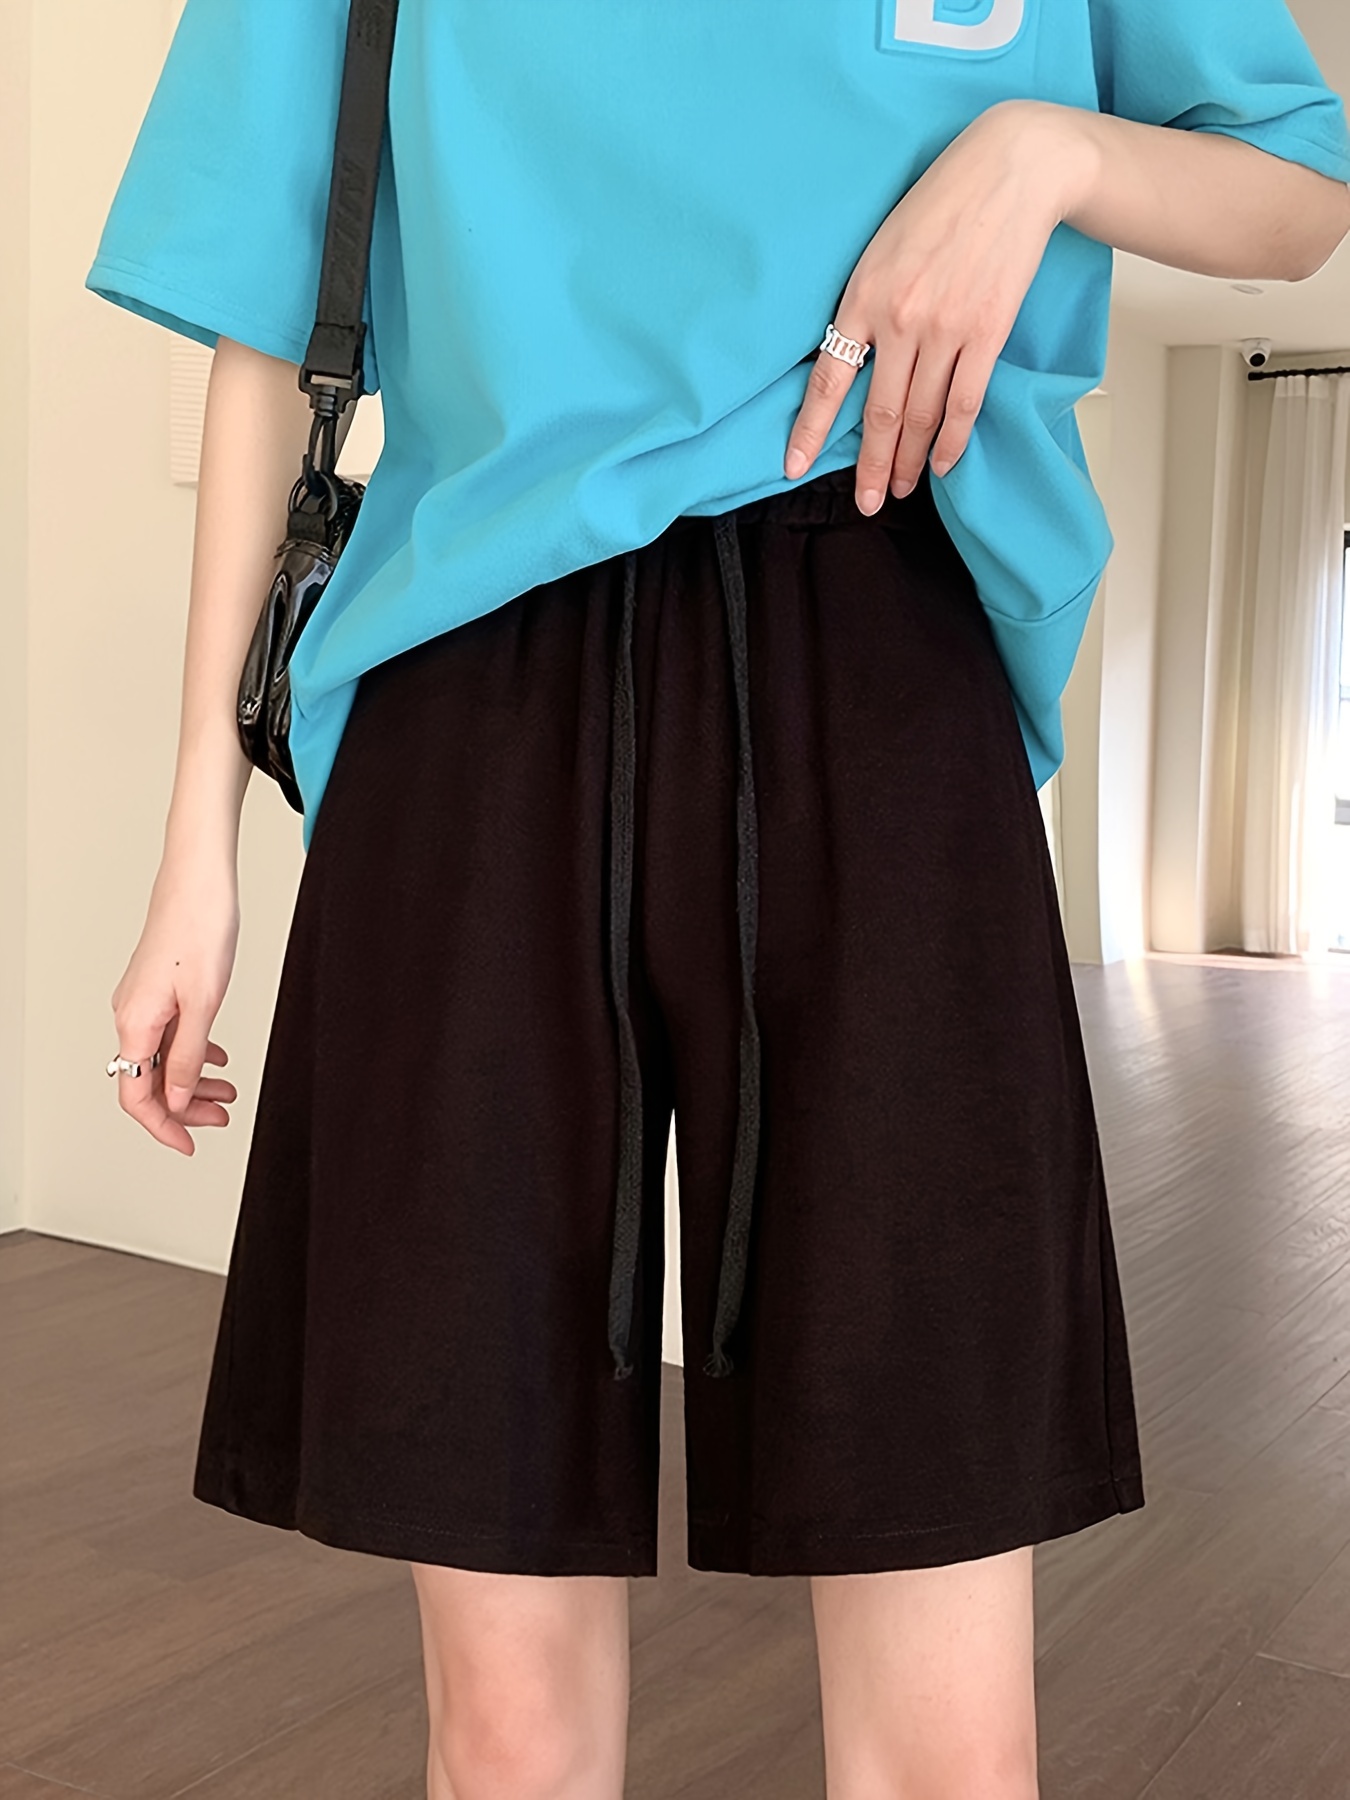 Women's Trousers & Shorts, Ladies Trousers